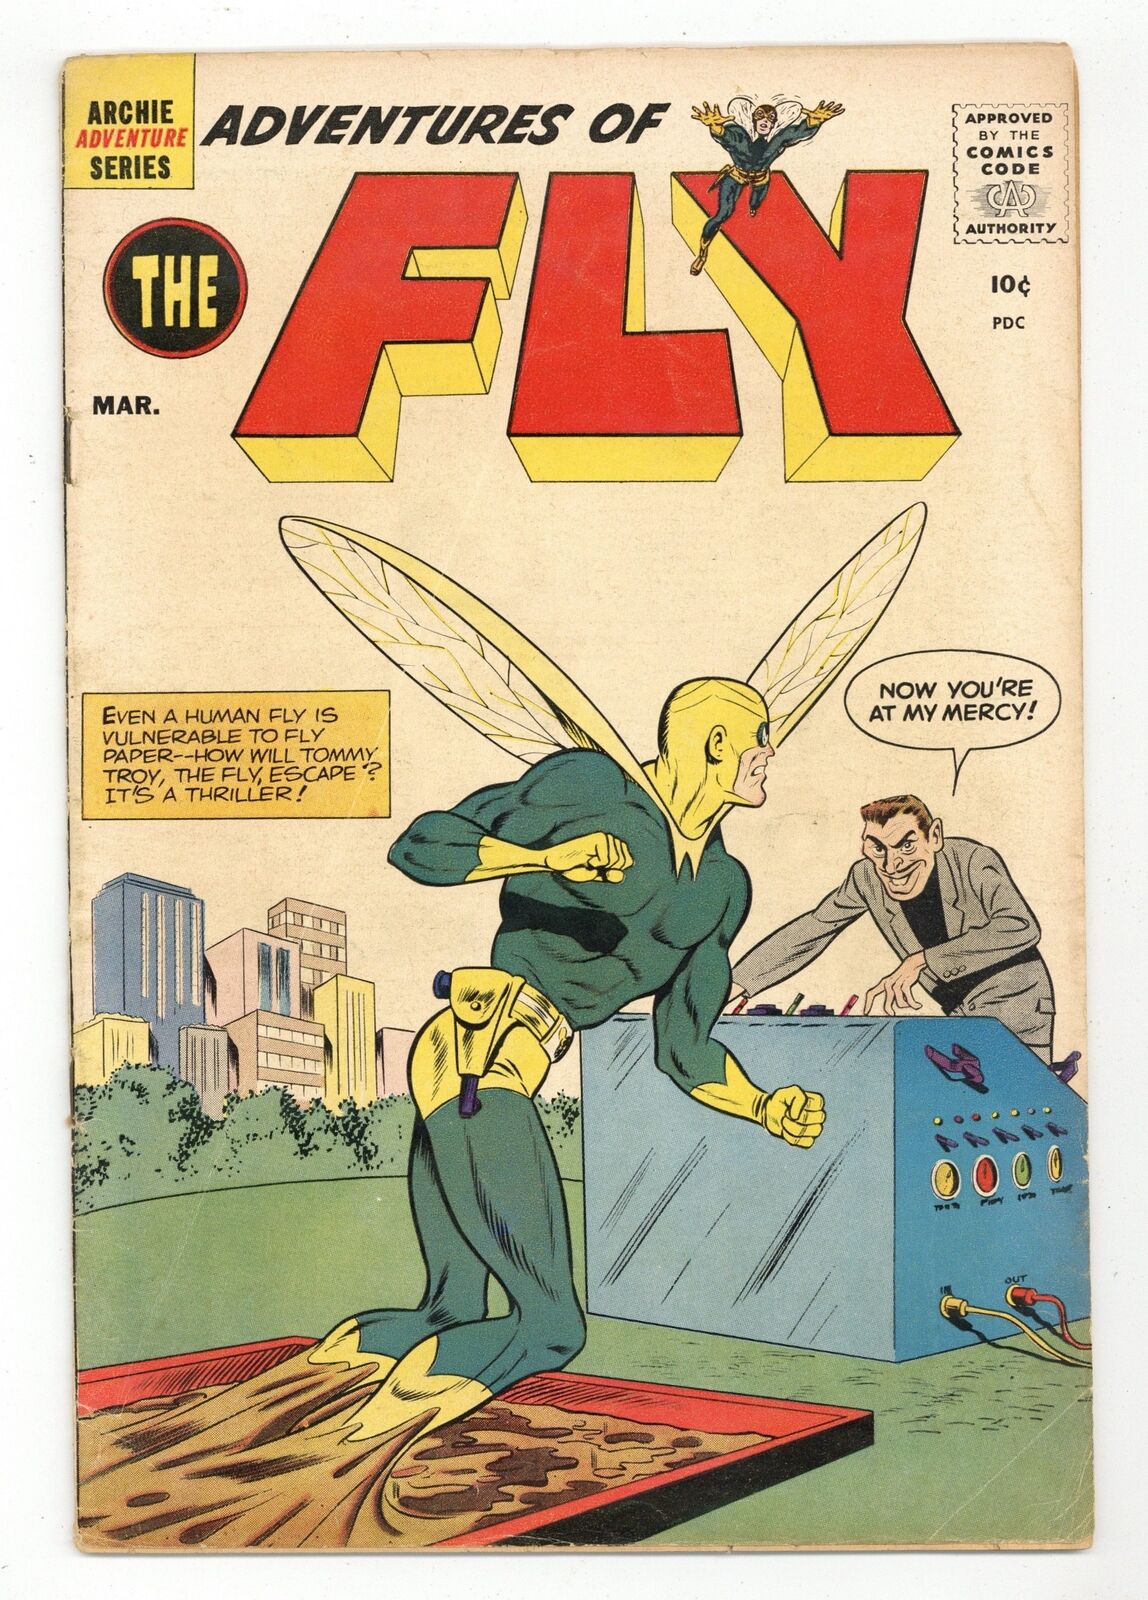 Adventures of the Fly #5 VG+ 4.5 1960